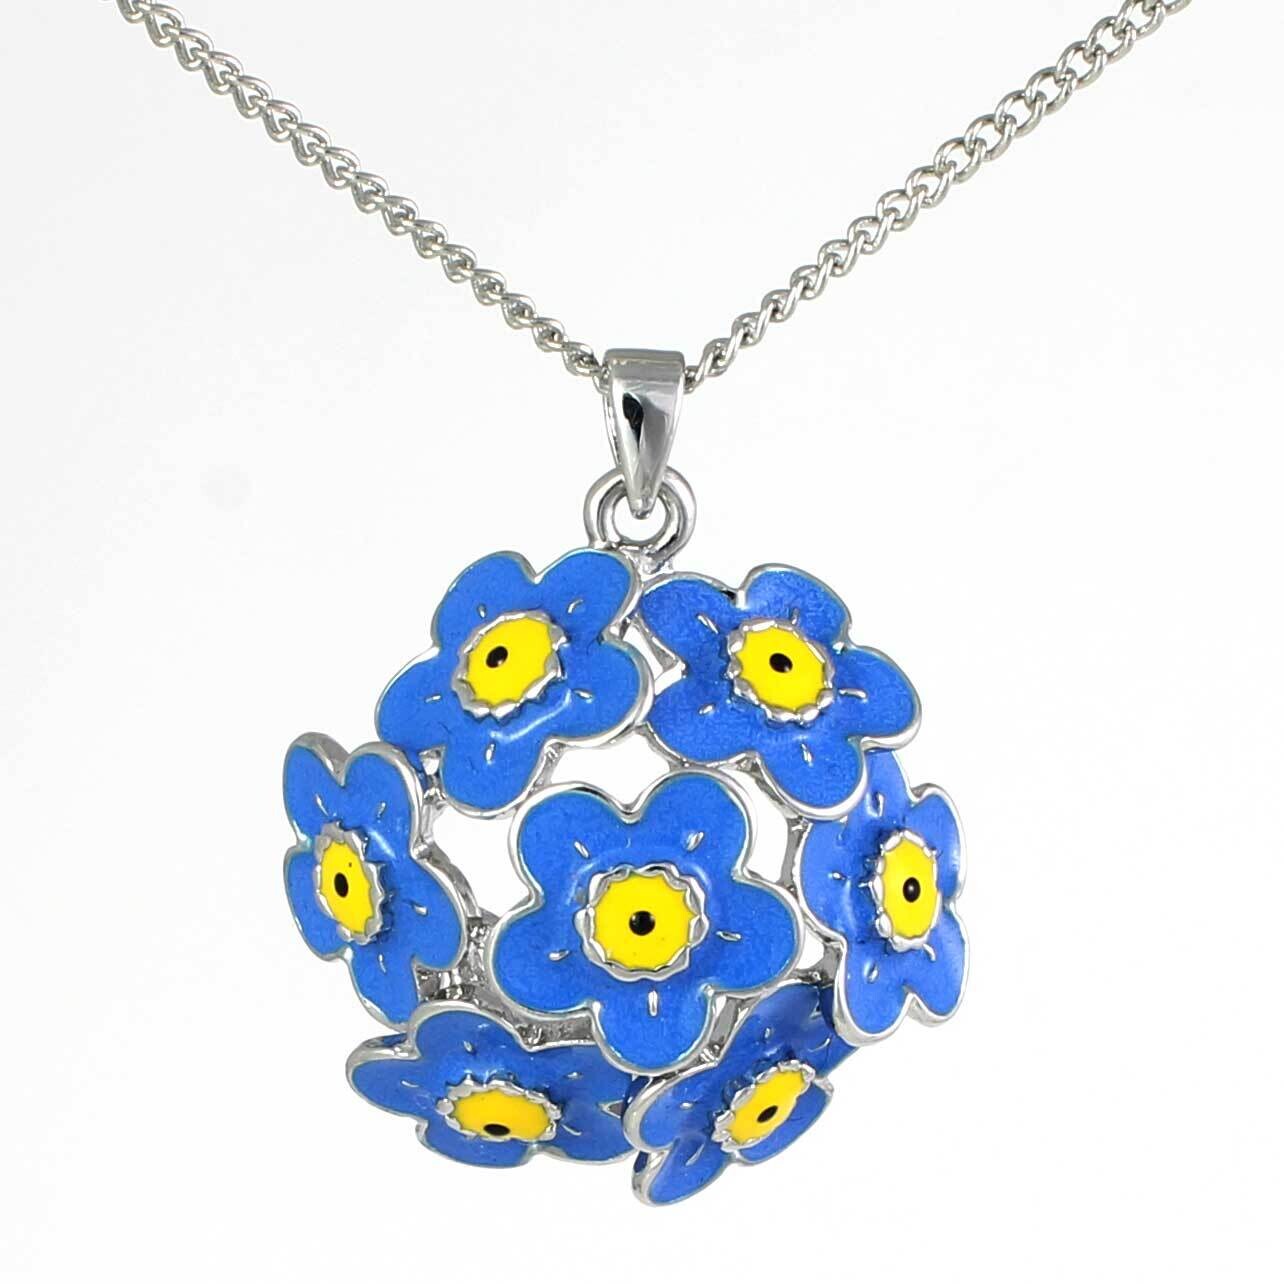 Forget Me Not cluster pendant